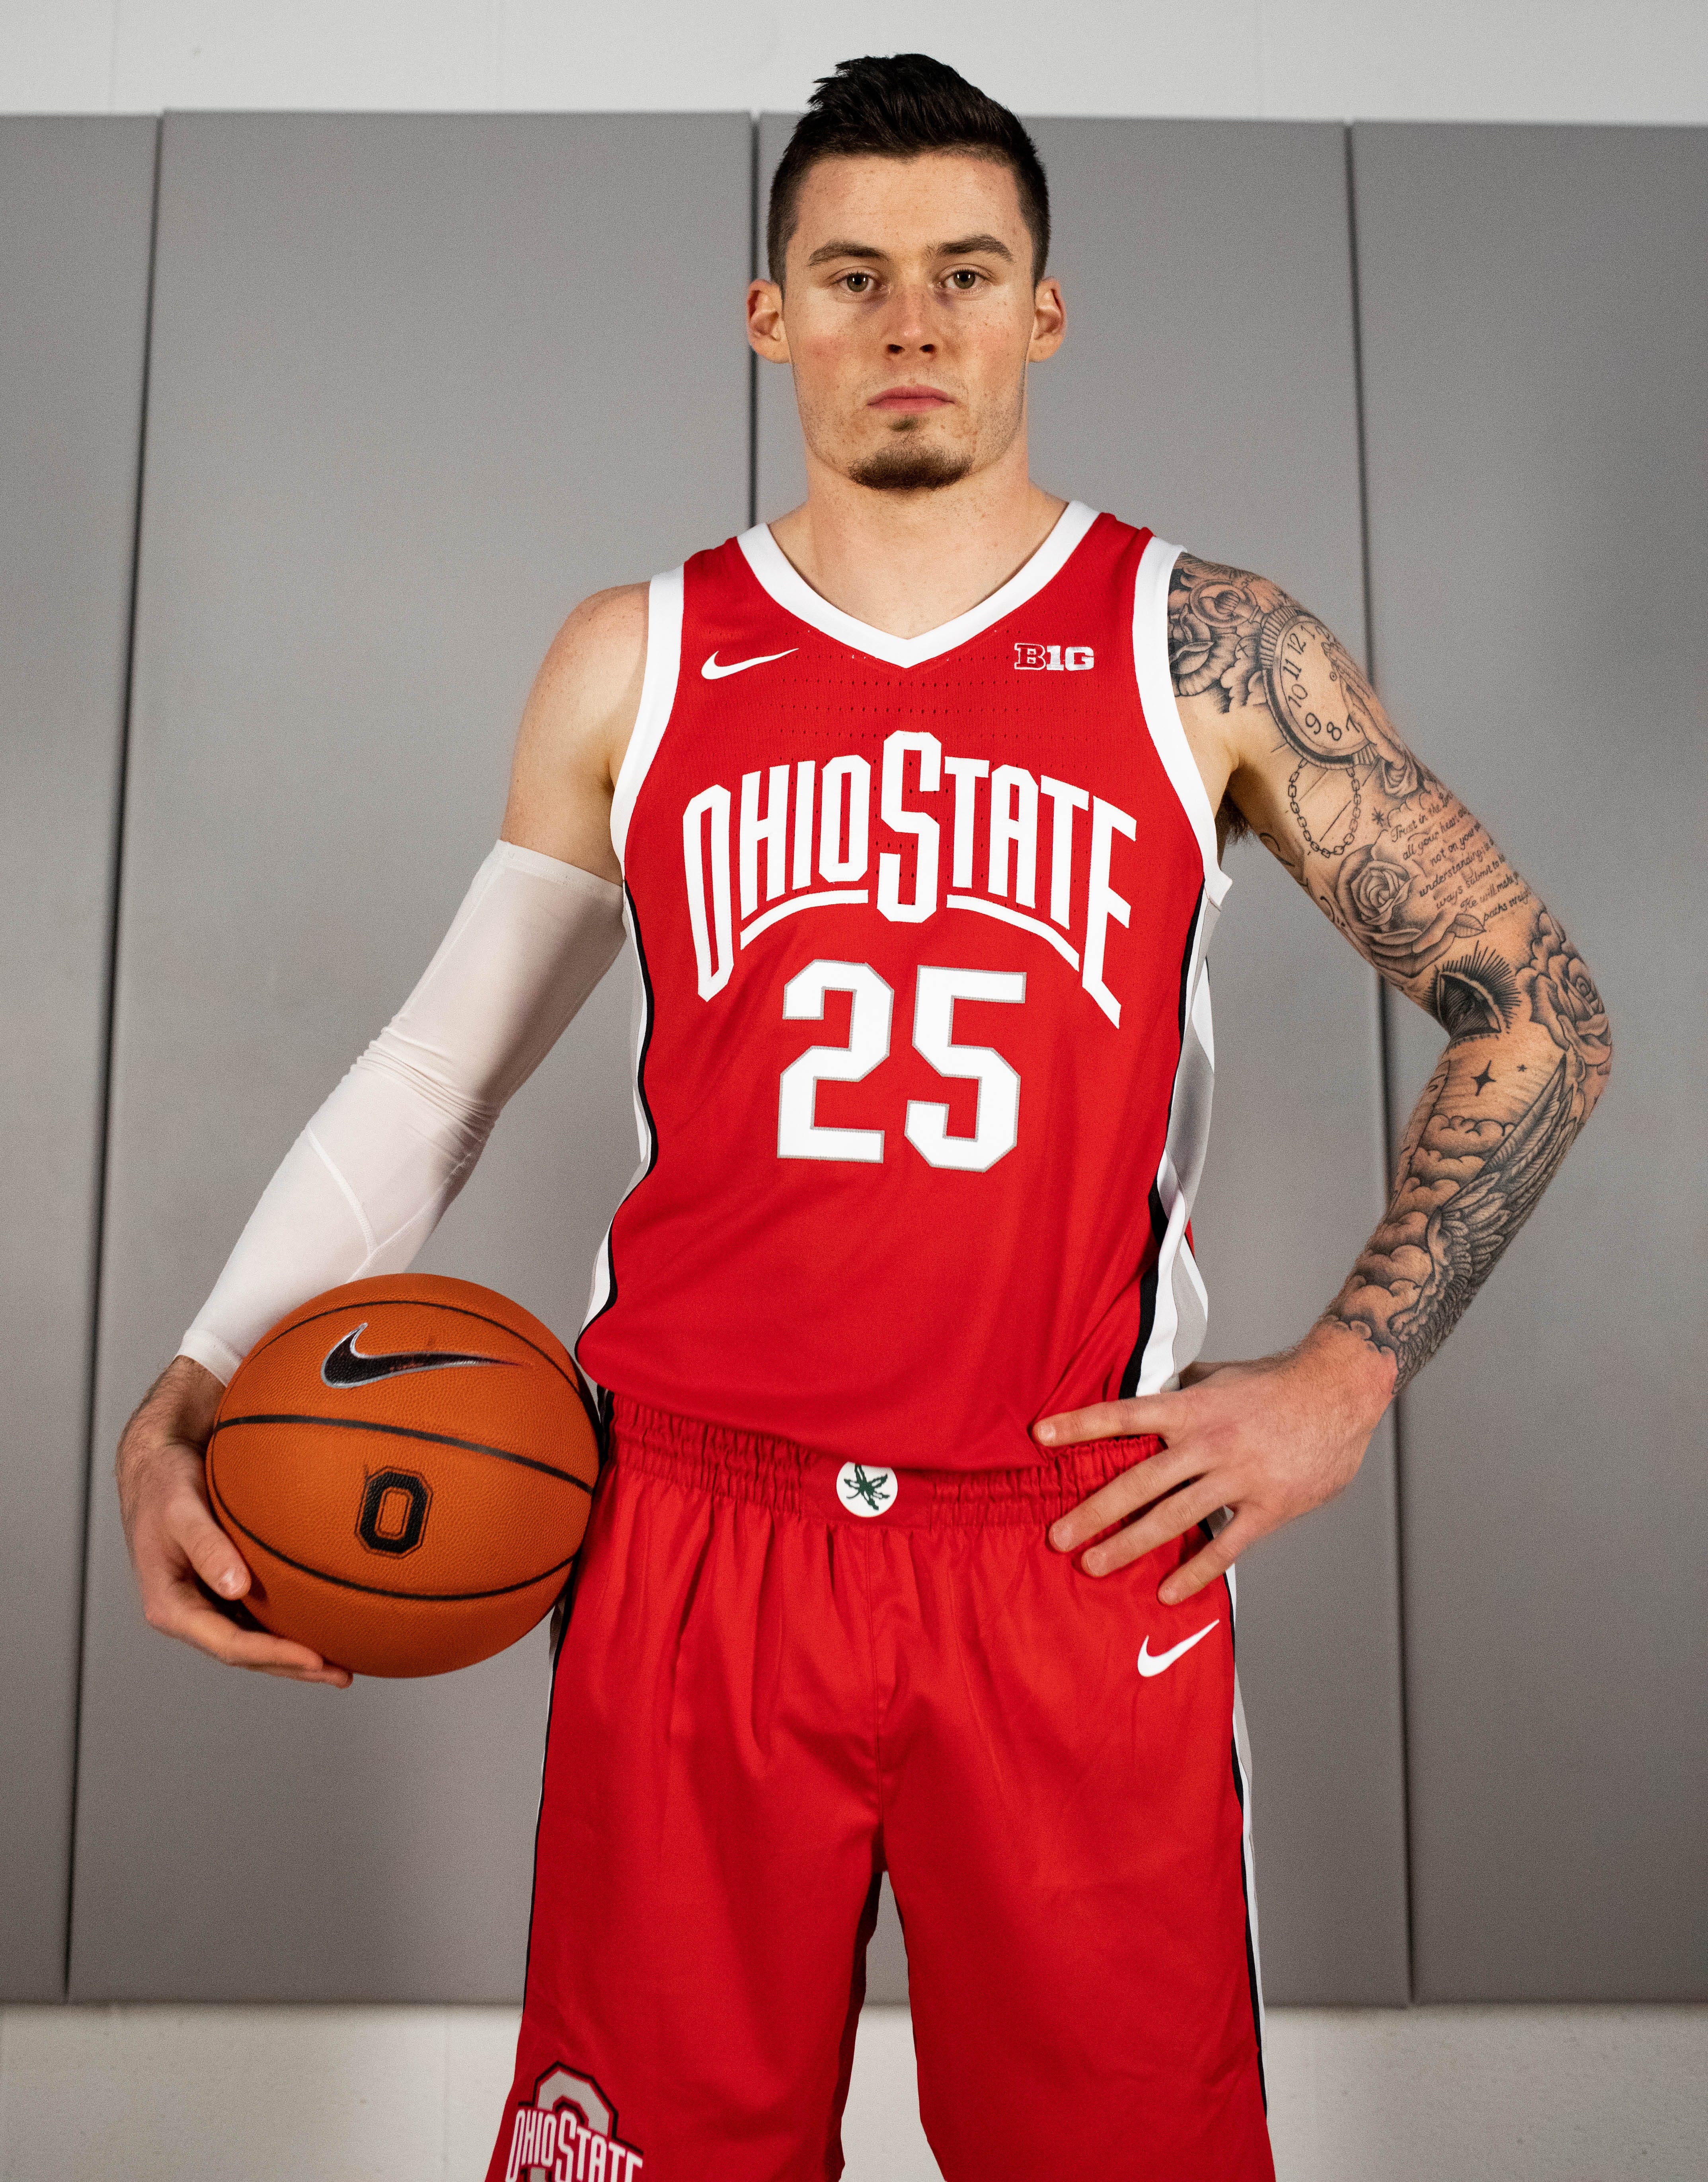 ohio state throwback basketball jersey